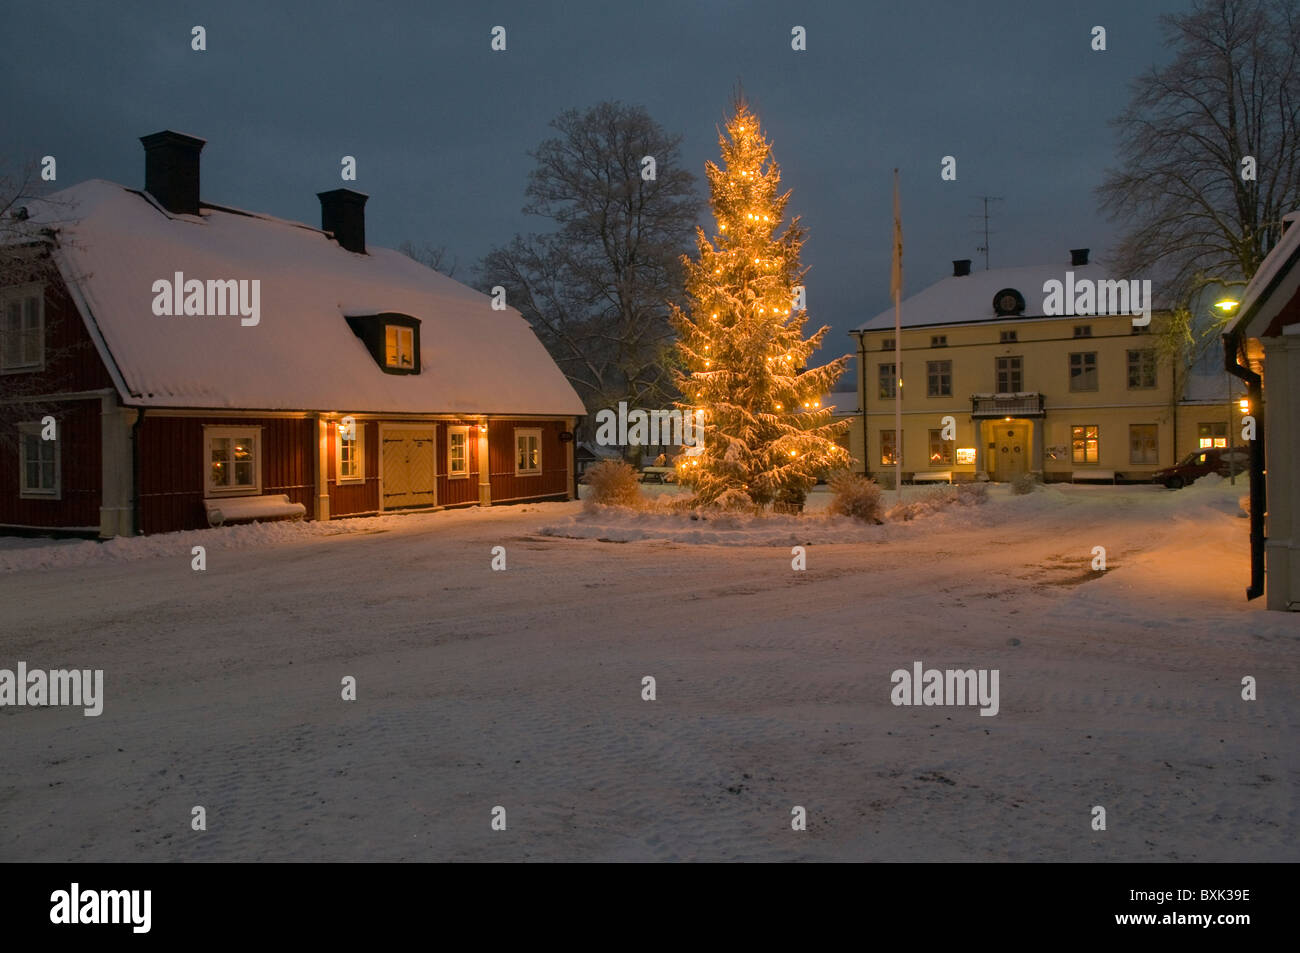 Swedish country house with a big illuminated Christmas tree in front of the house. Stock Photo